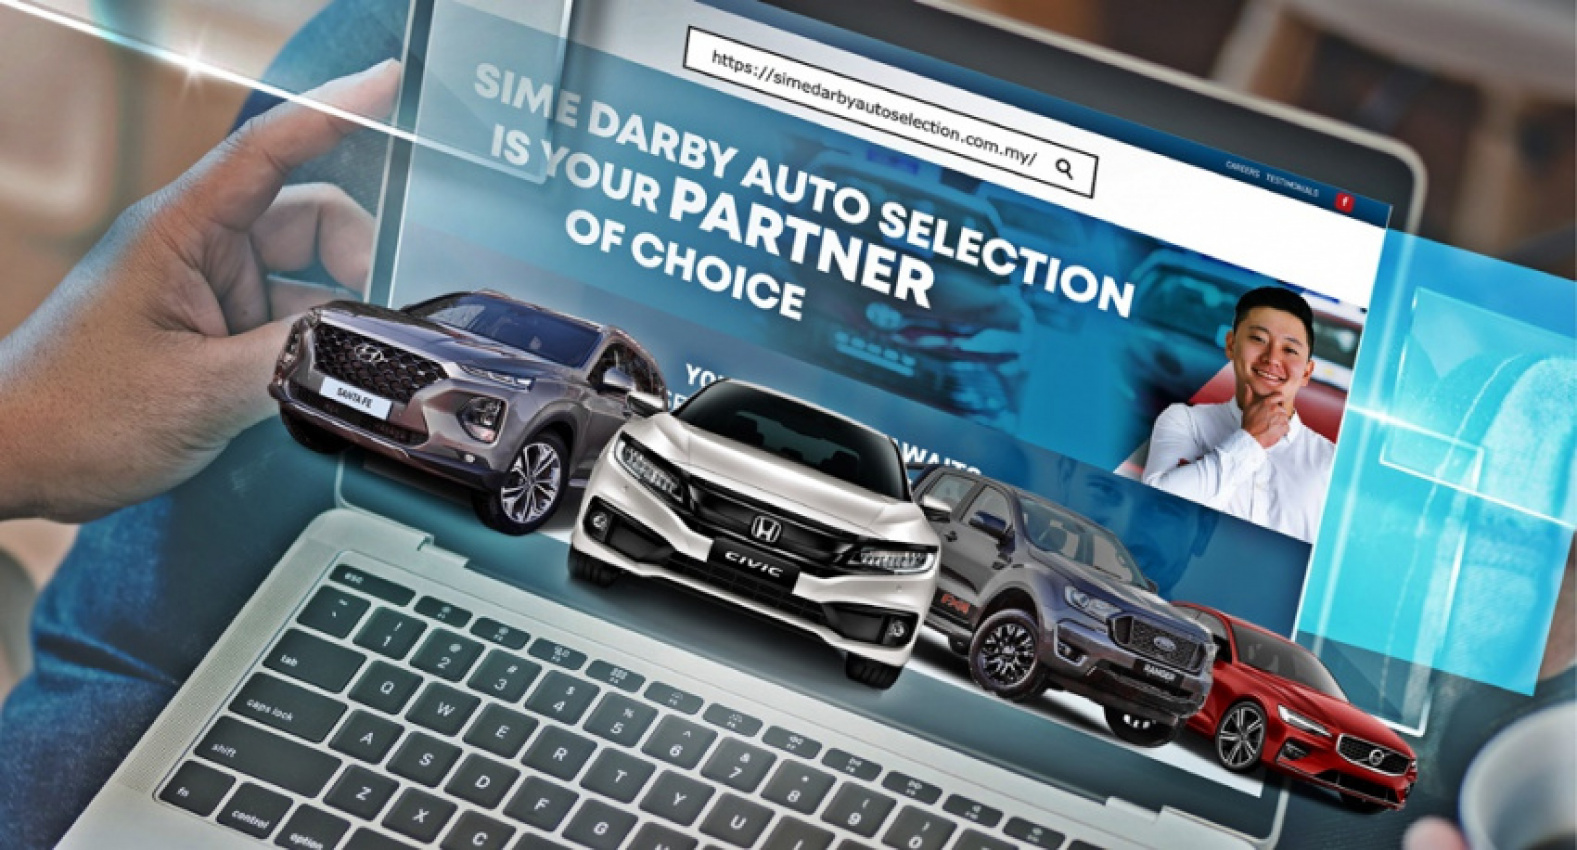 autos, cars, buyback option, car-sharing marketplace, sime darby auto selection, used cars, sime darby auto selection offers car-buyers a way to earn extra income with their vehicle